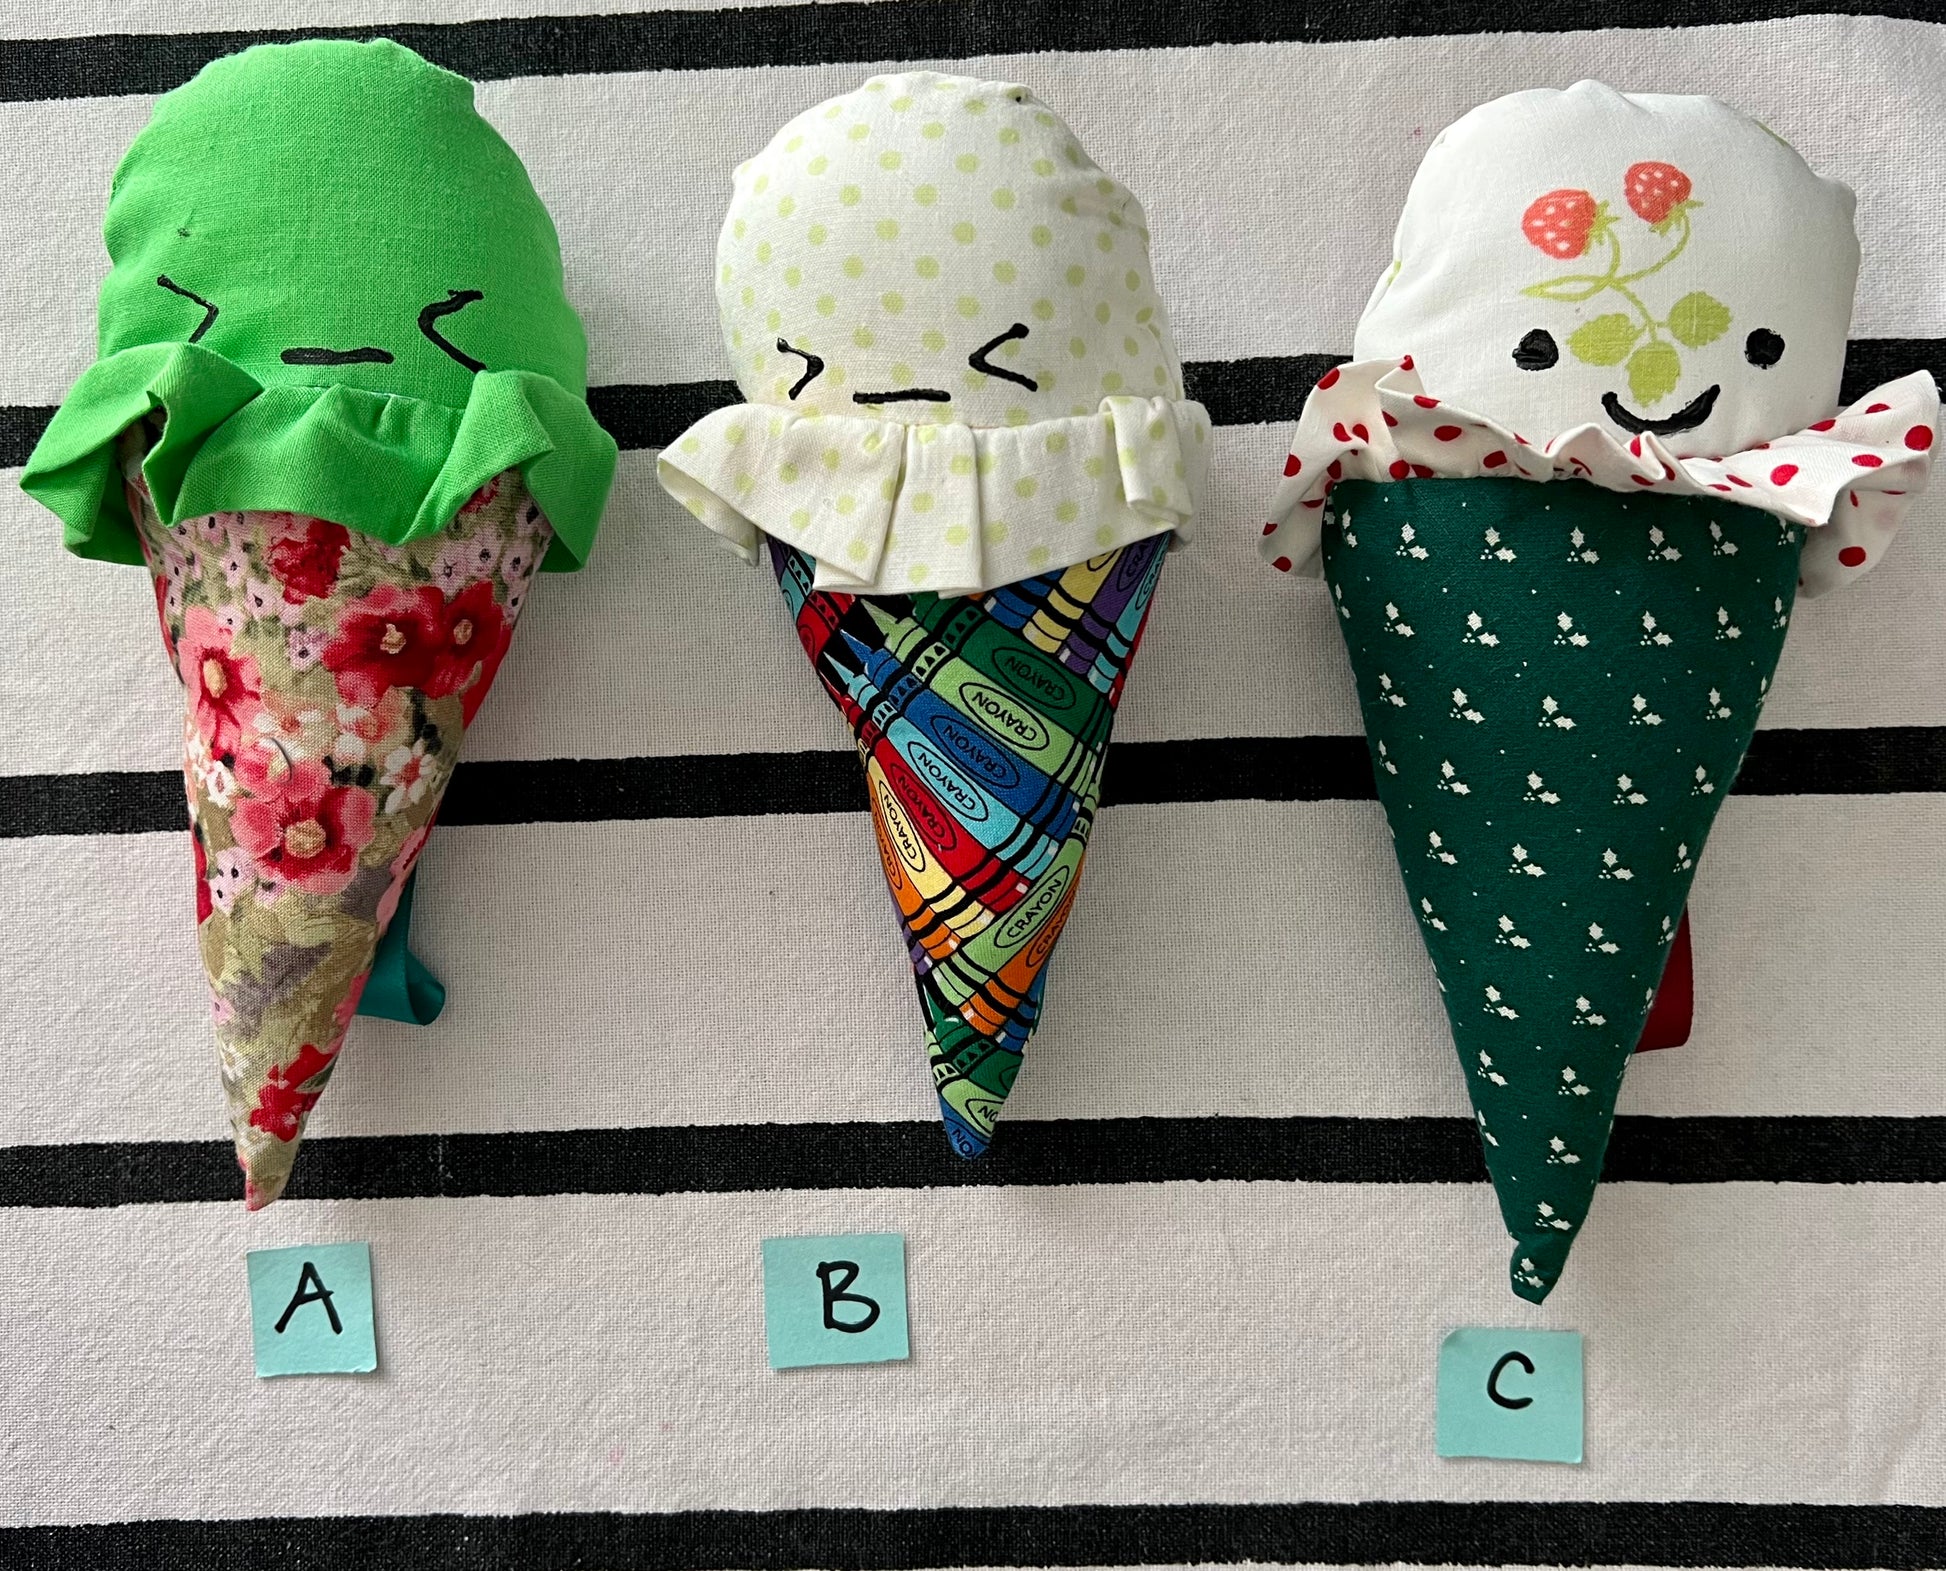 Ice cream cone plushies with handpainted faces, lined up with the letters A B C below them